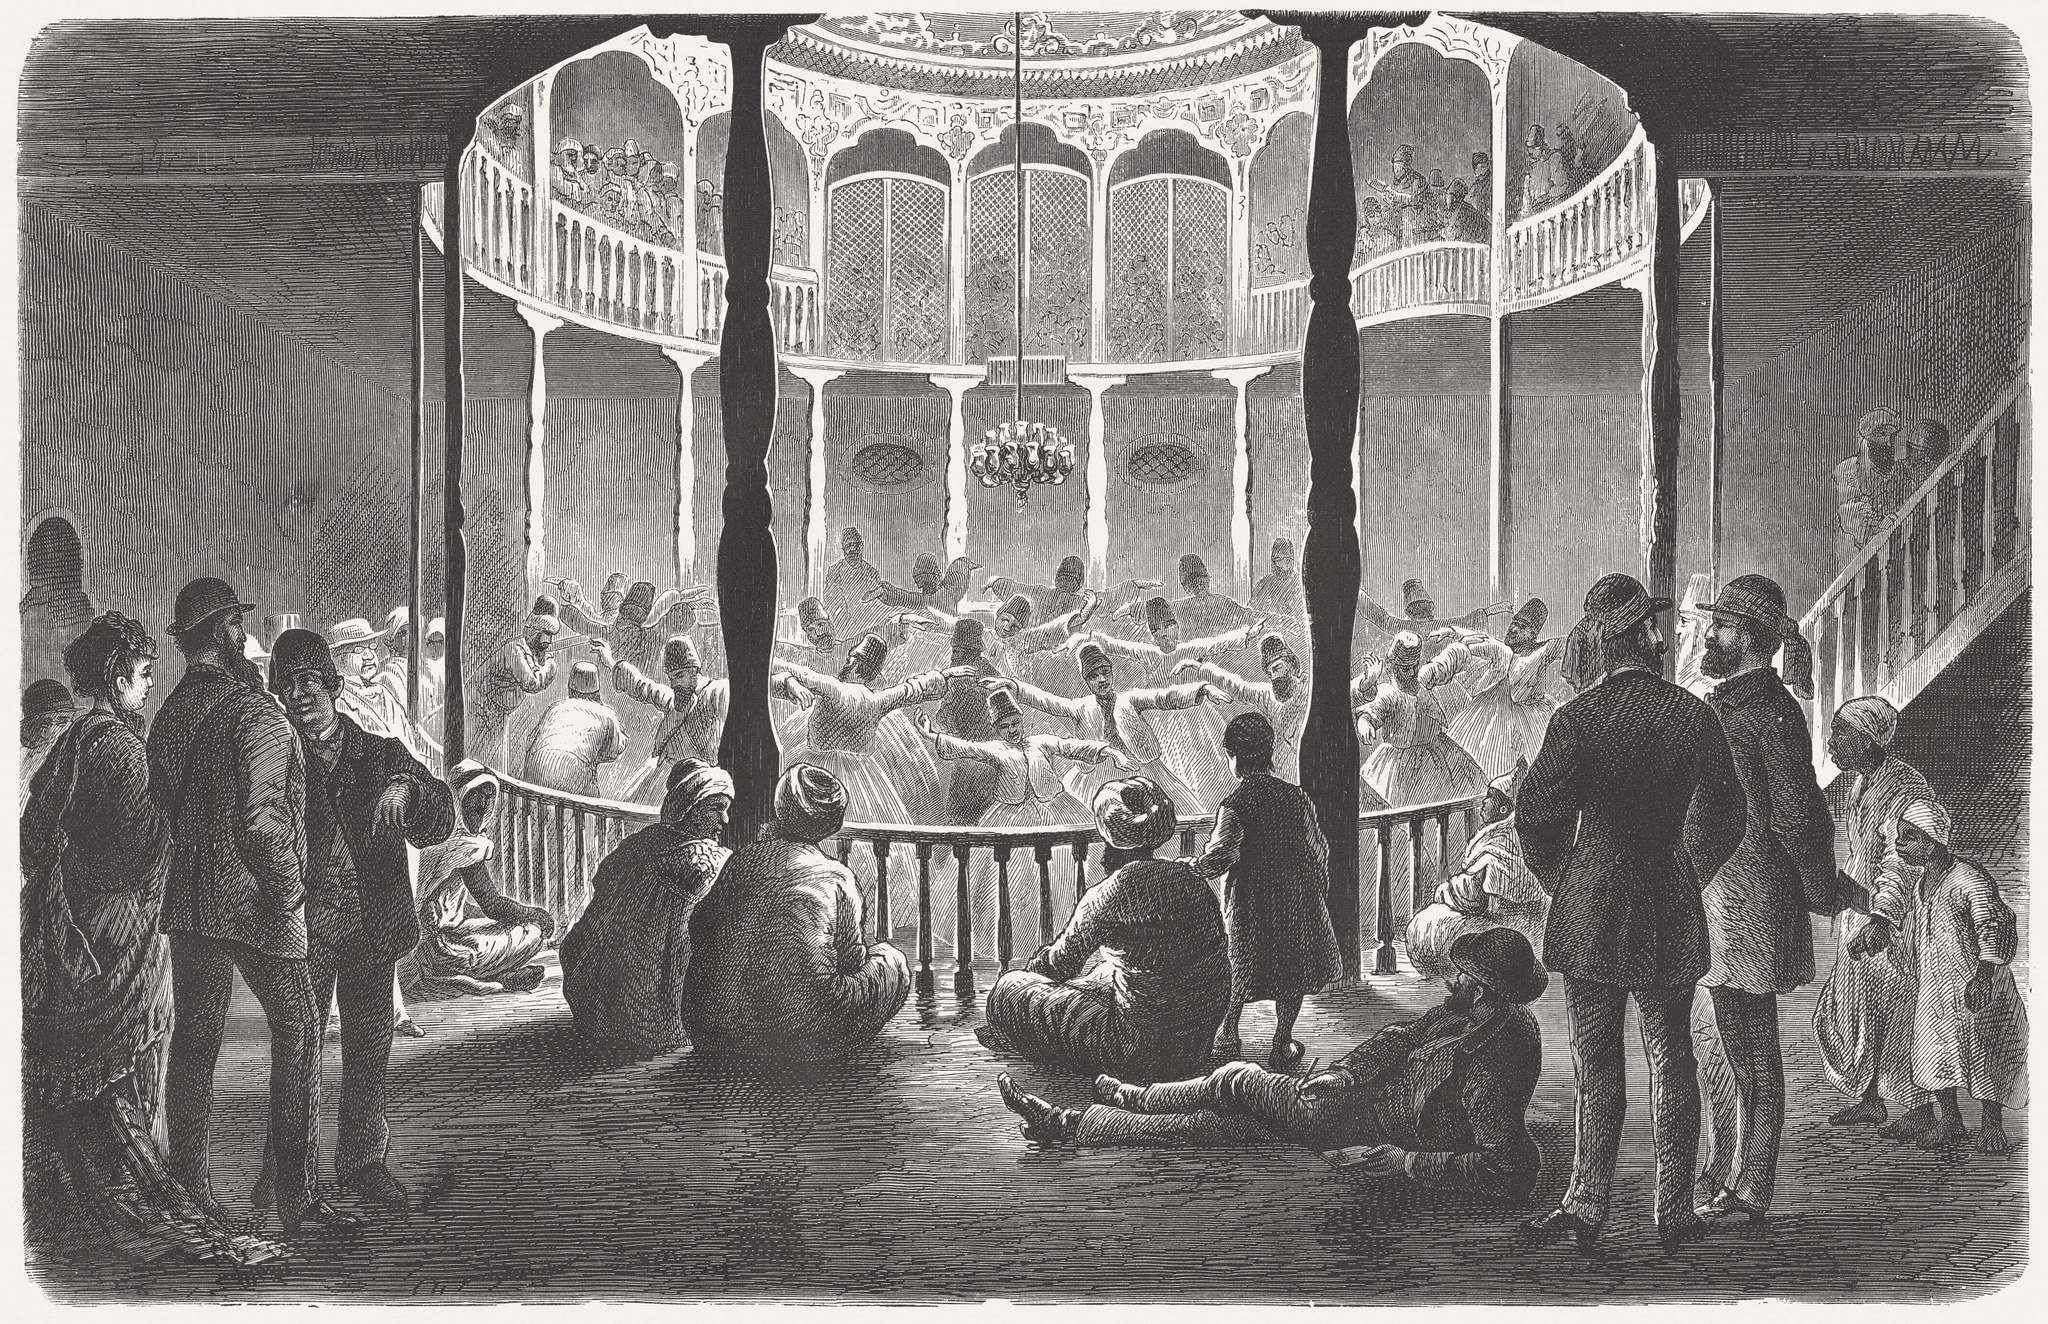 A 19th-century drawing of a group of whirling dervishes dancing